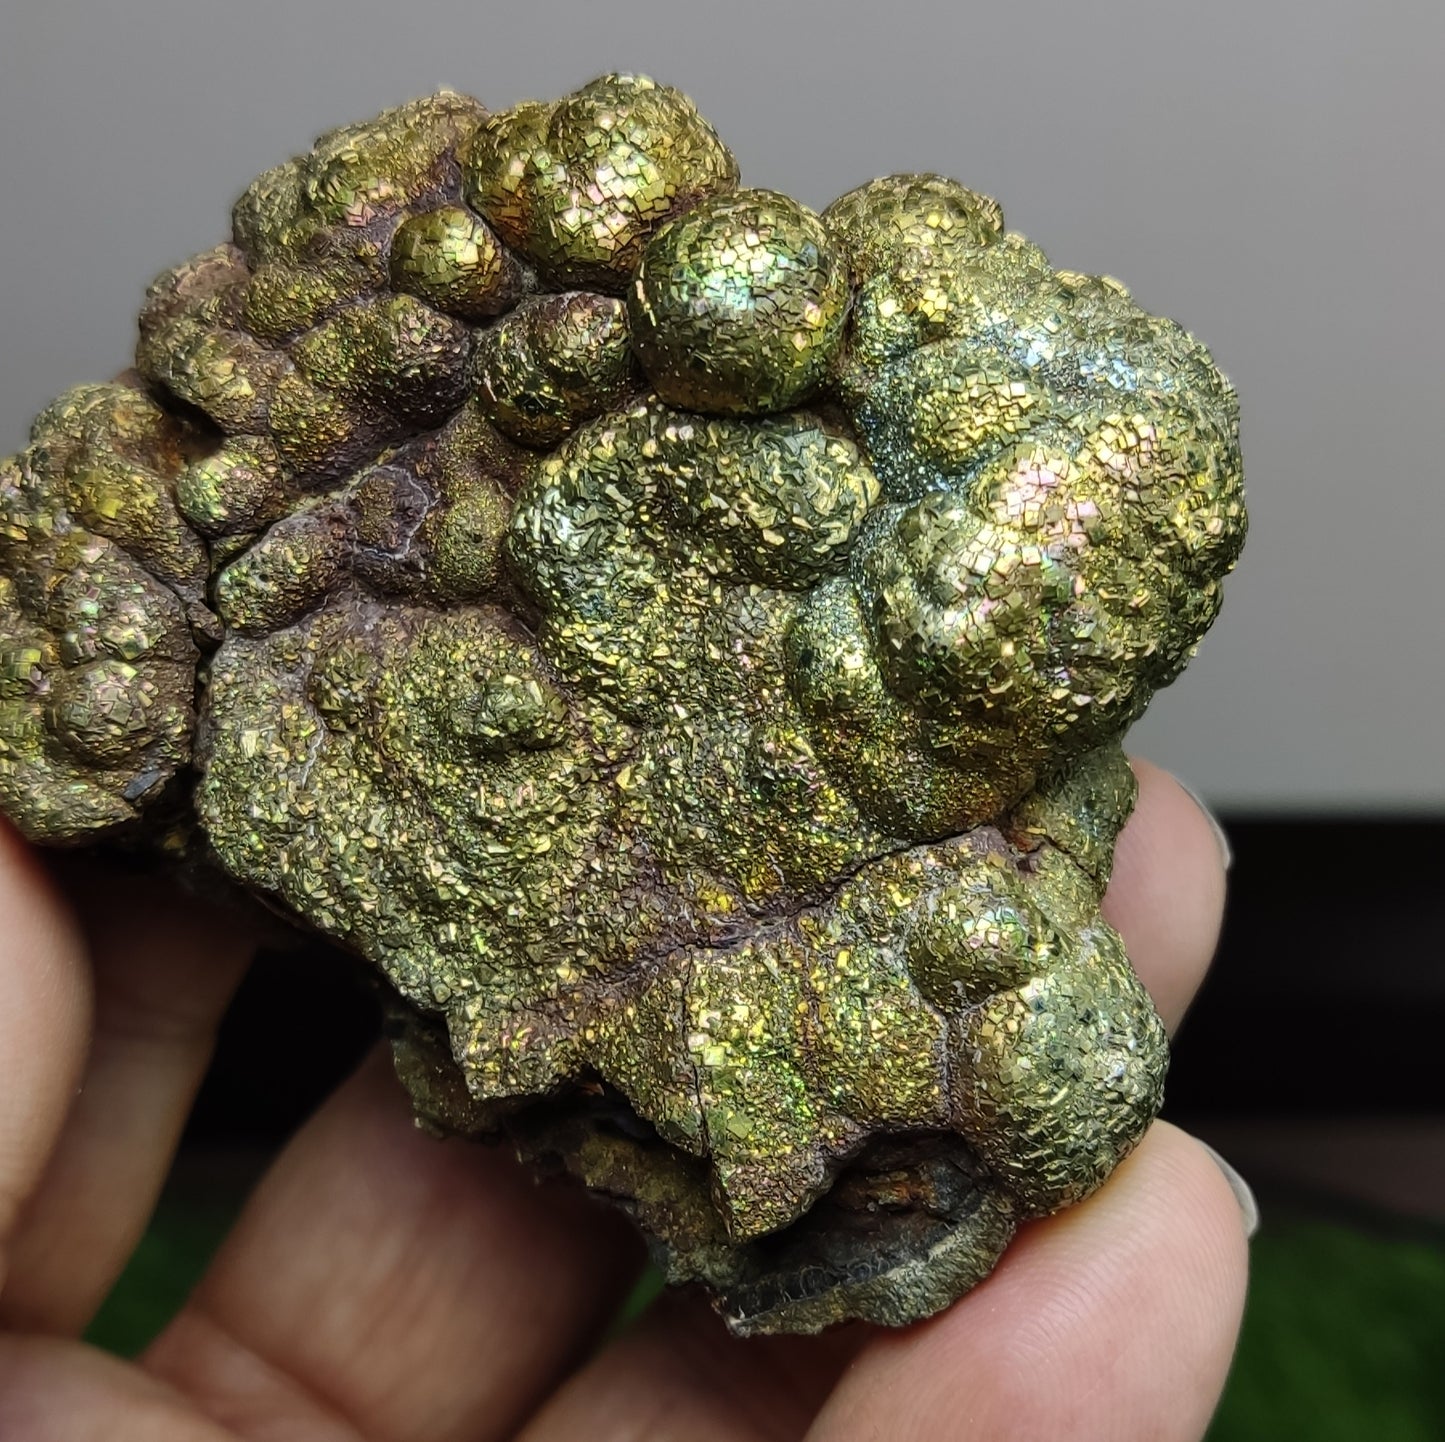 pyrite/marcasite with Iridescent Patterns 240 grams